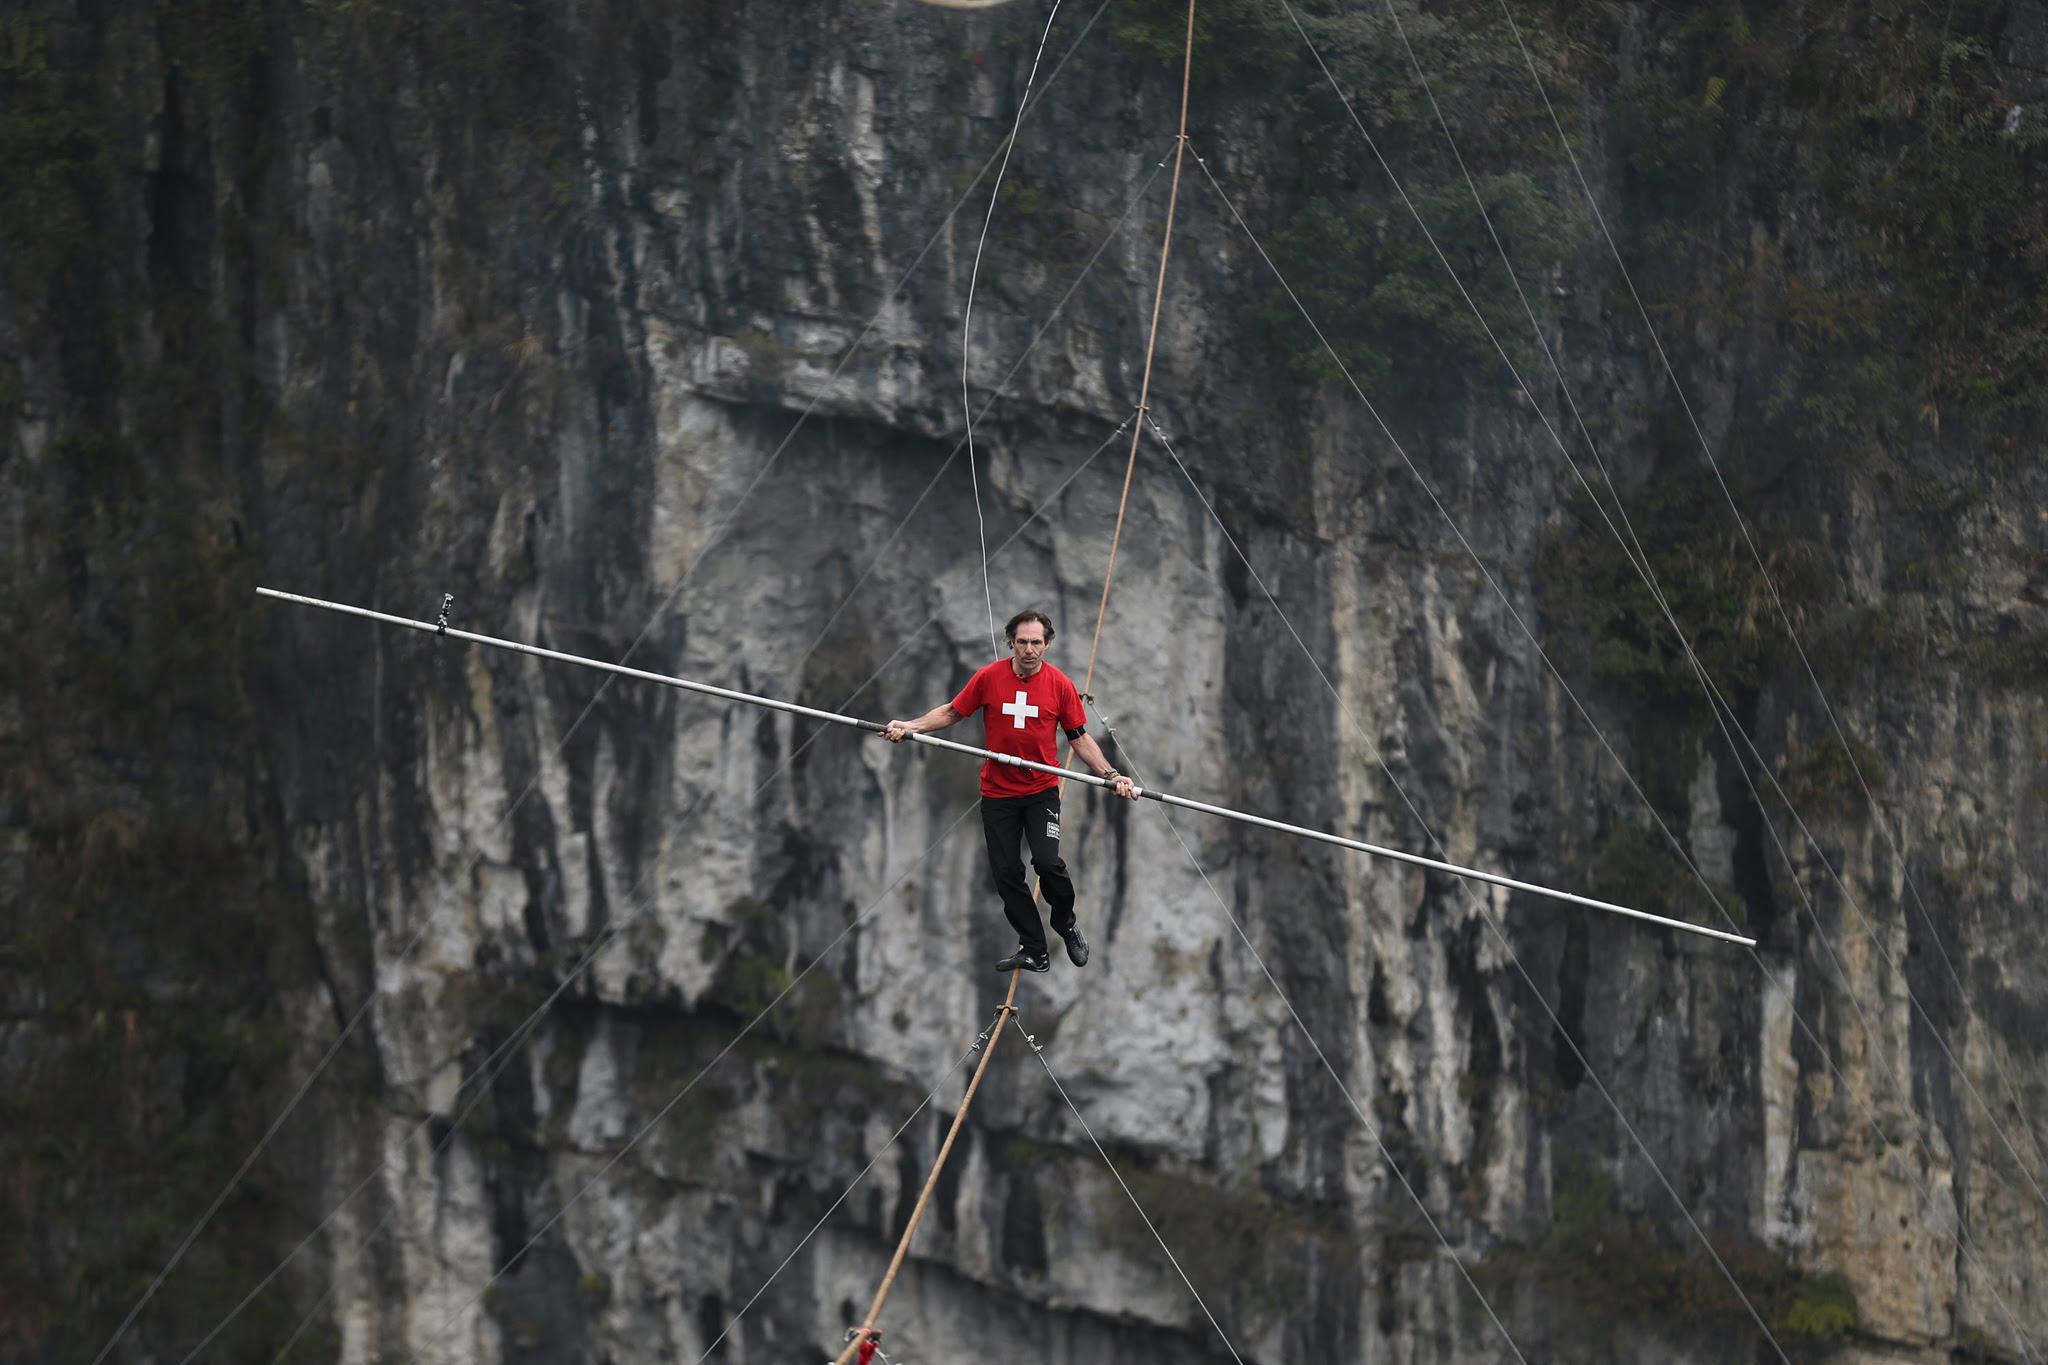 Freddy Nock of Switzerland walks on tightrope during a competition in Wulong county, Chongqing, China, March 30, 2016.